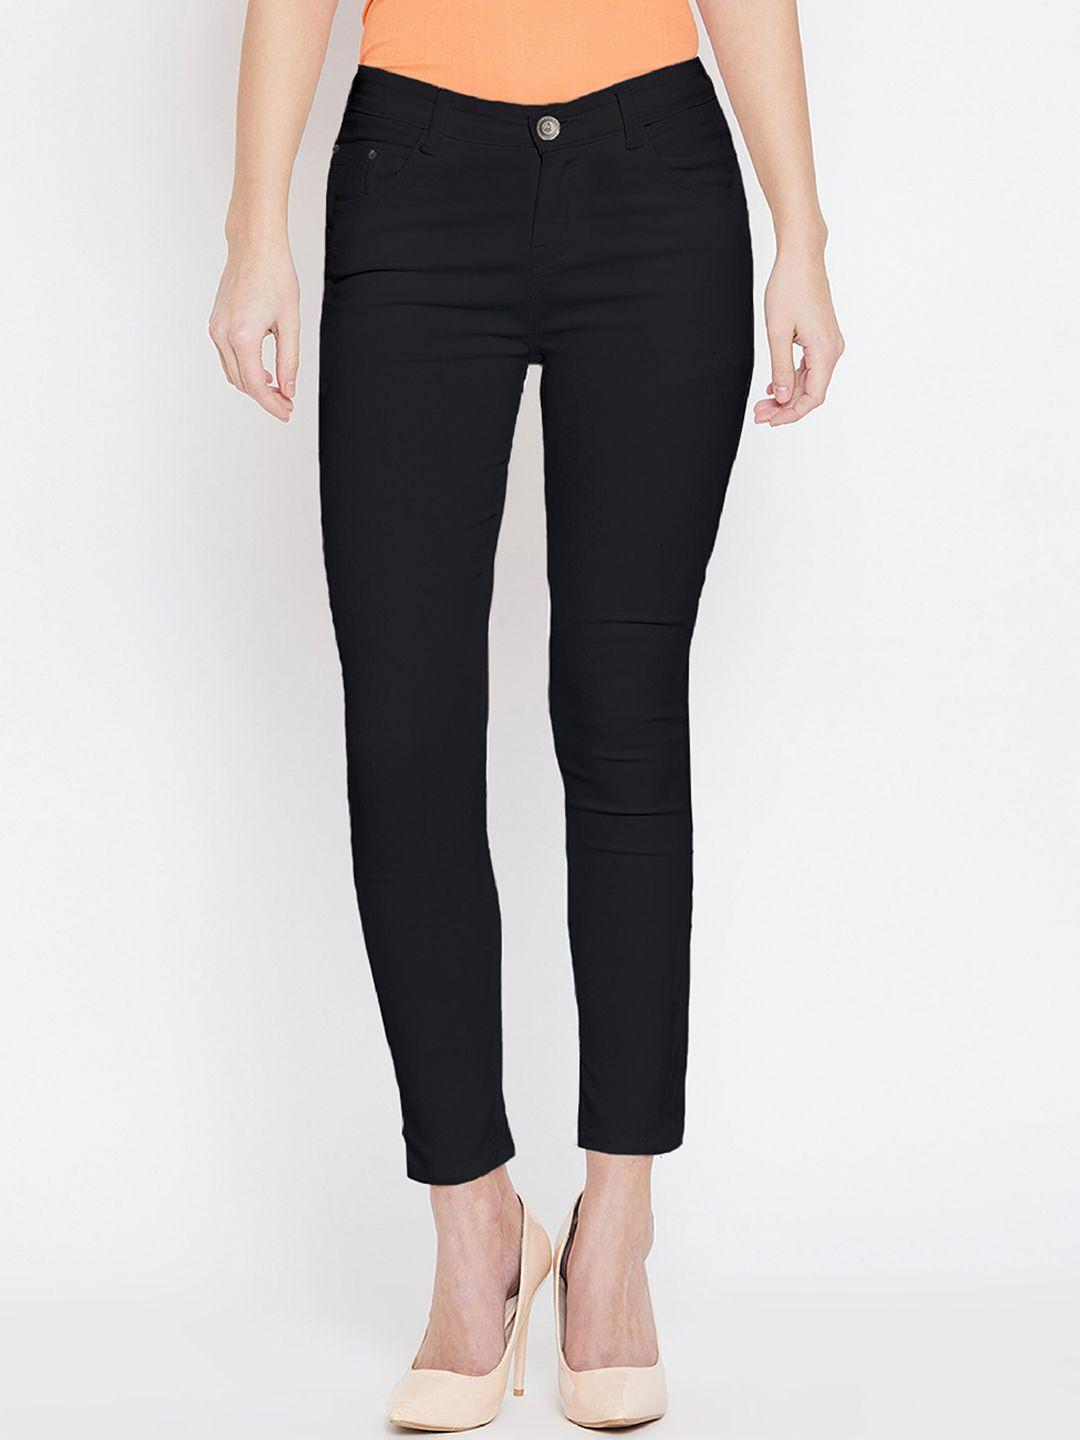 the dry state women black mid-rise slim fit jeans